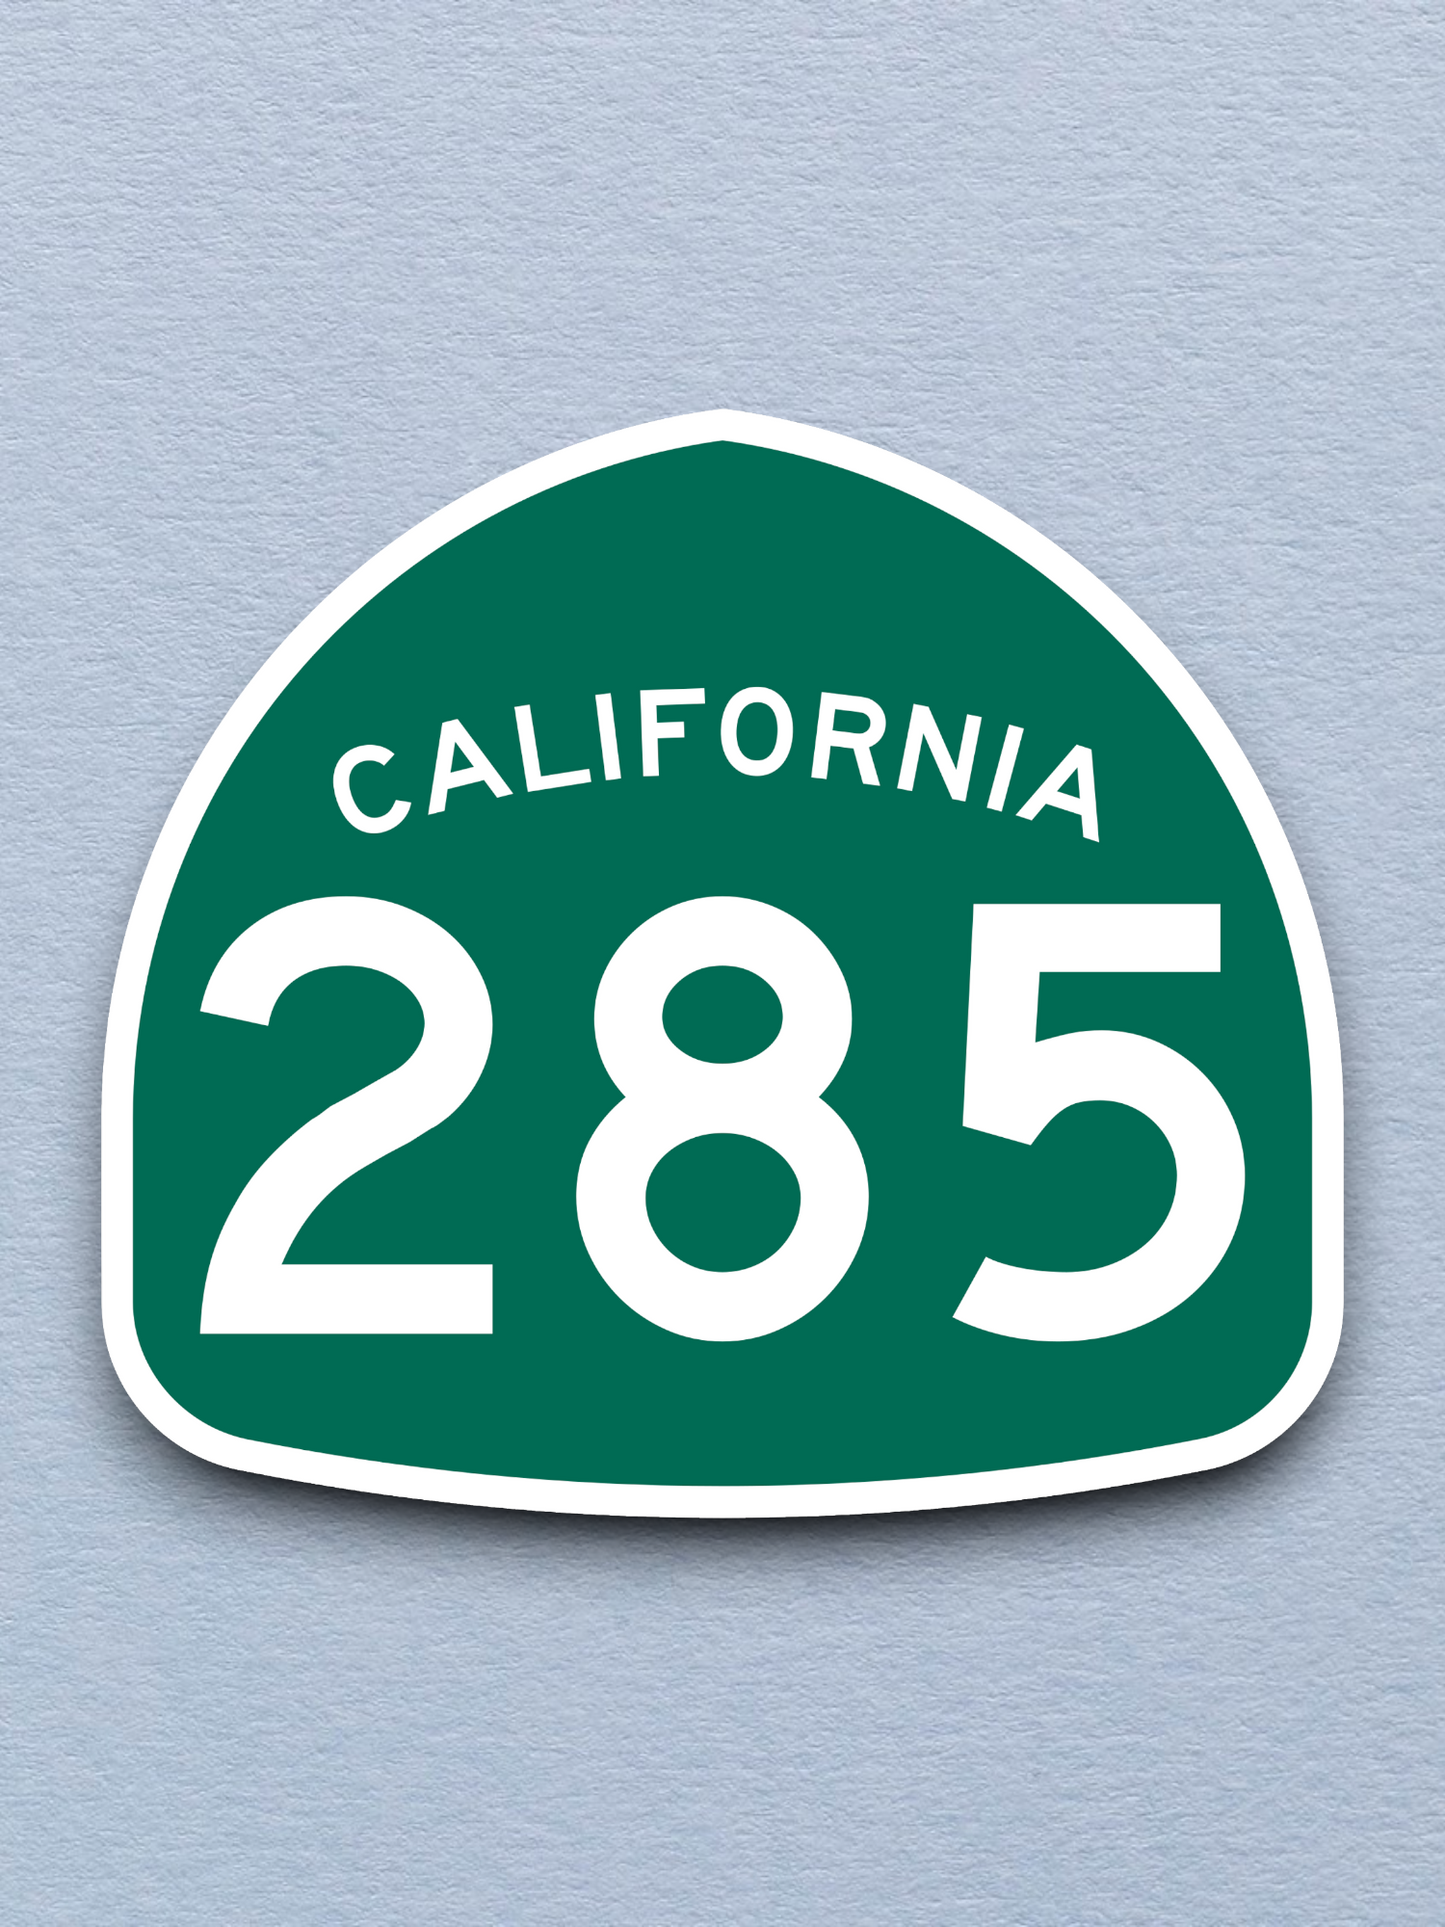 California State Route 285 Road Sign Sticker